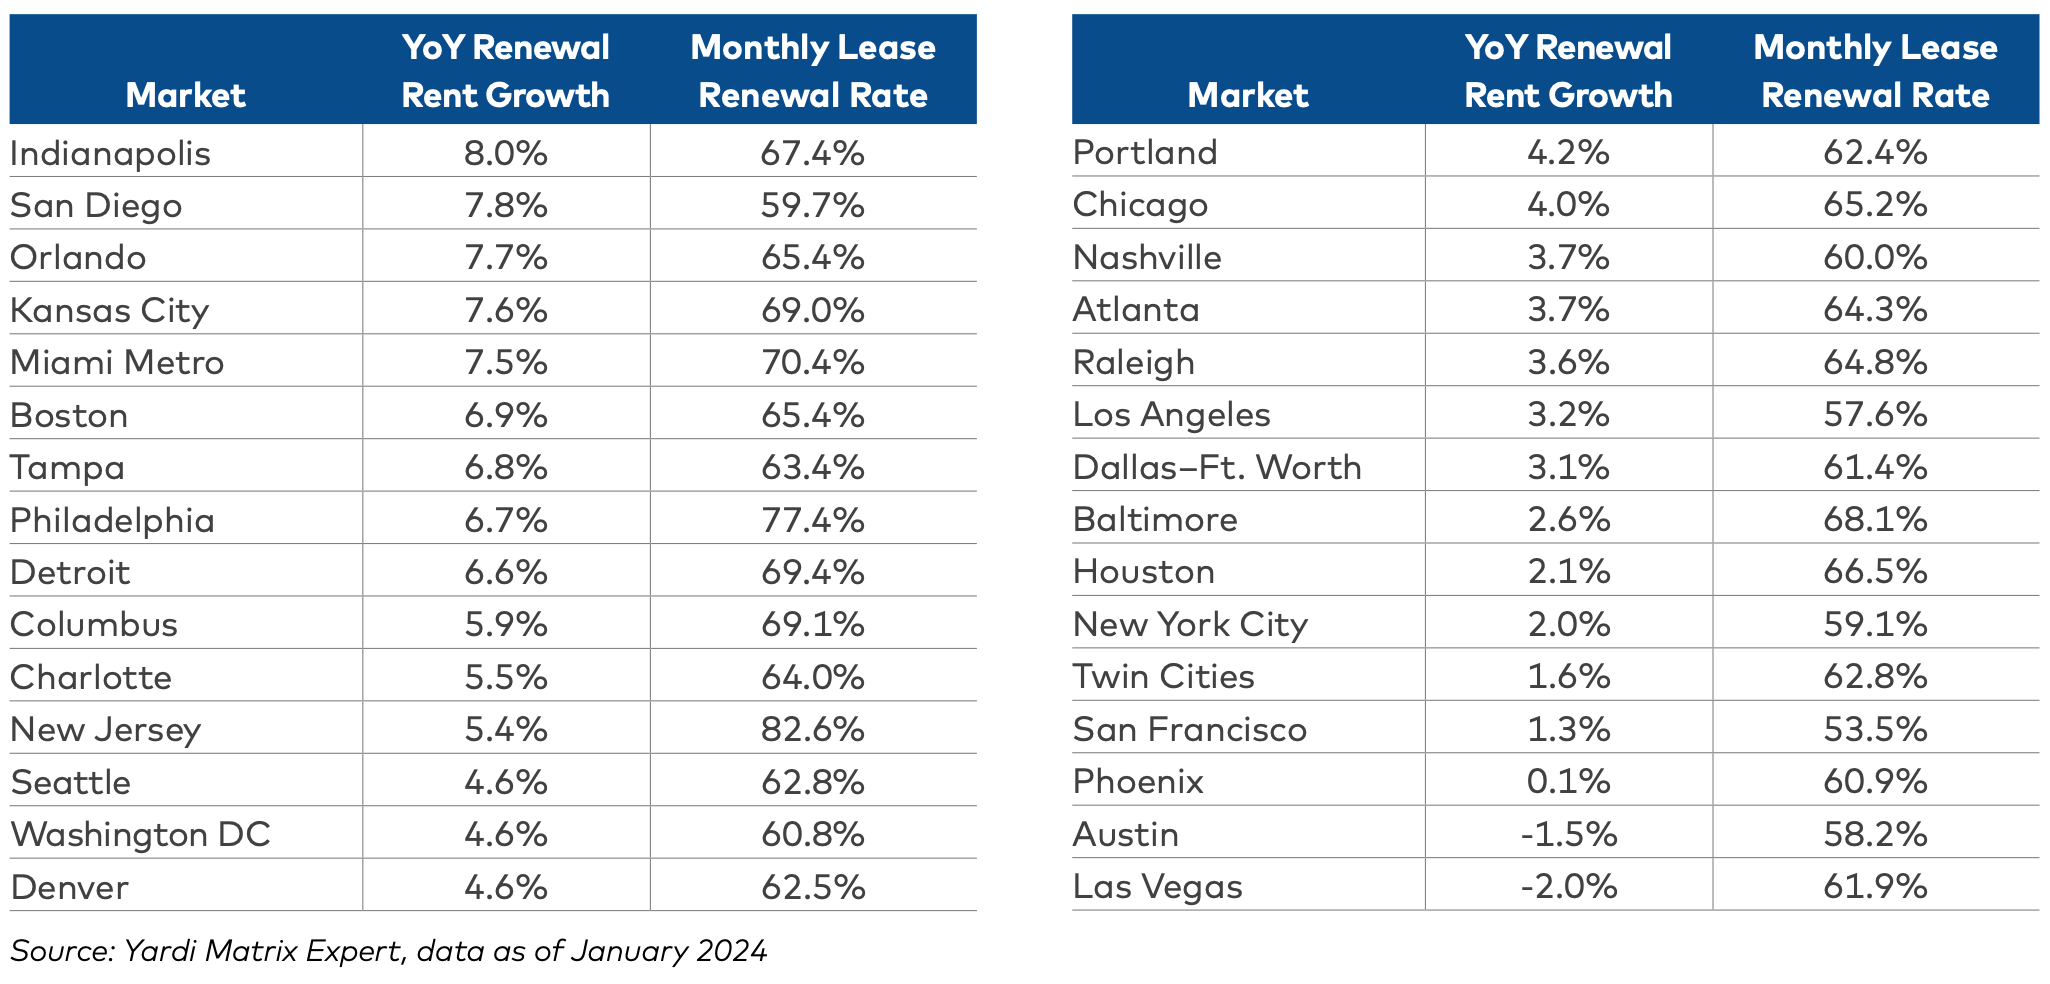 Renewal rent growth and monthly lease renewal rates in top metros.